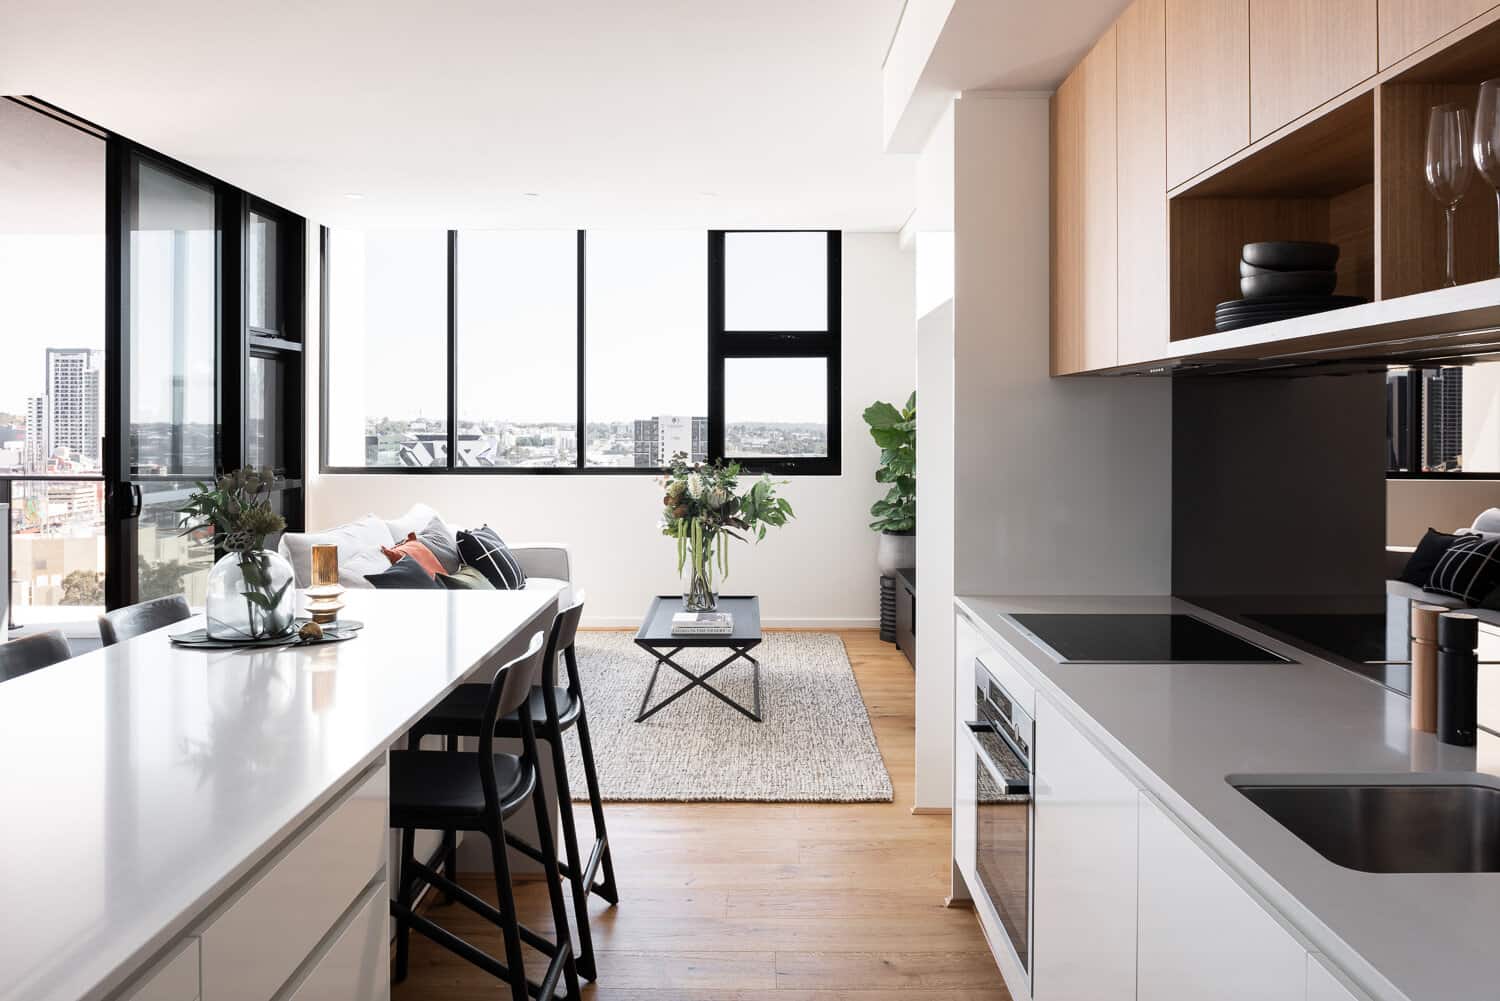 Kitchen and Living space at Verdant Apartments